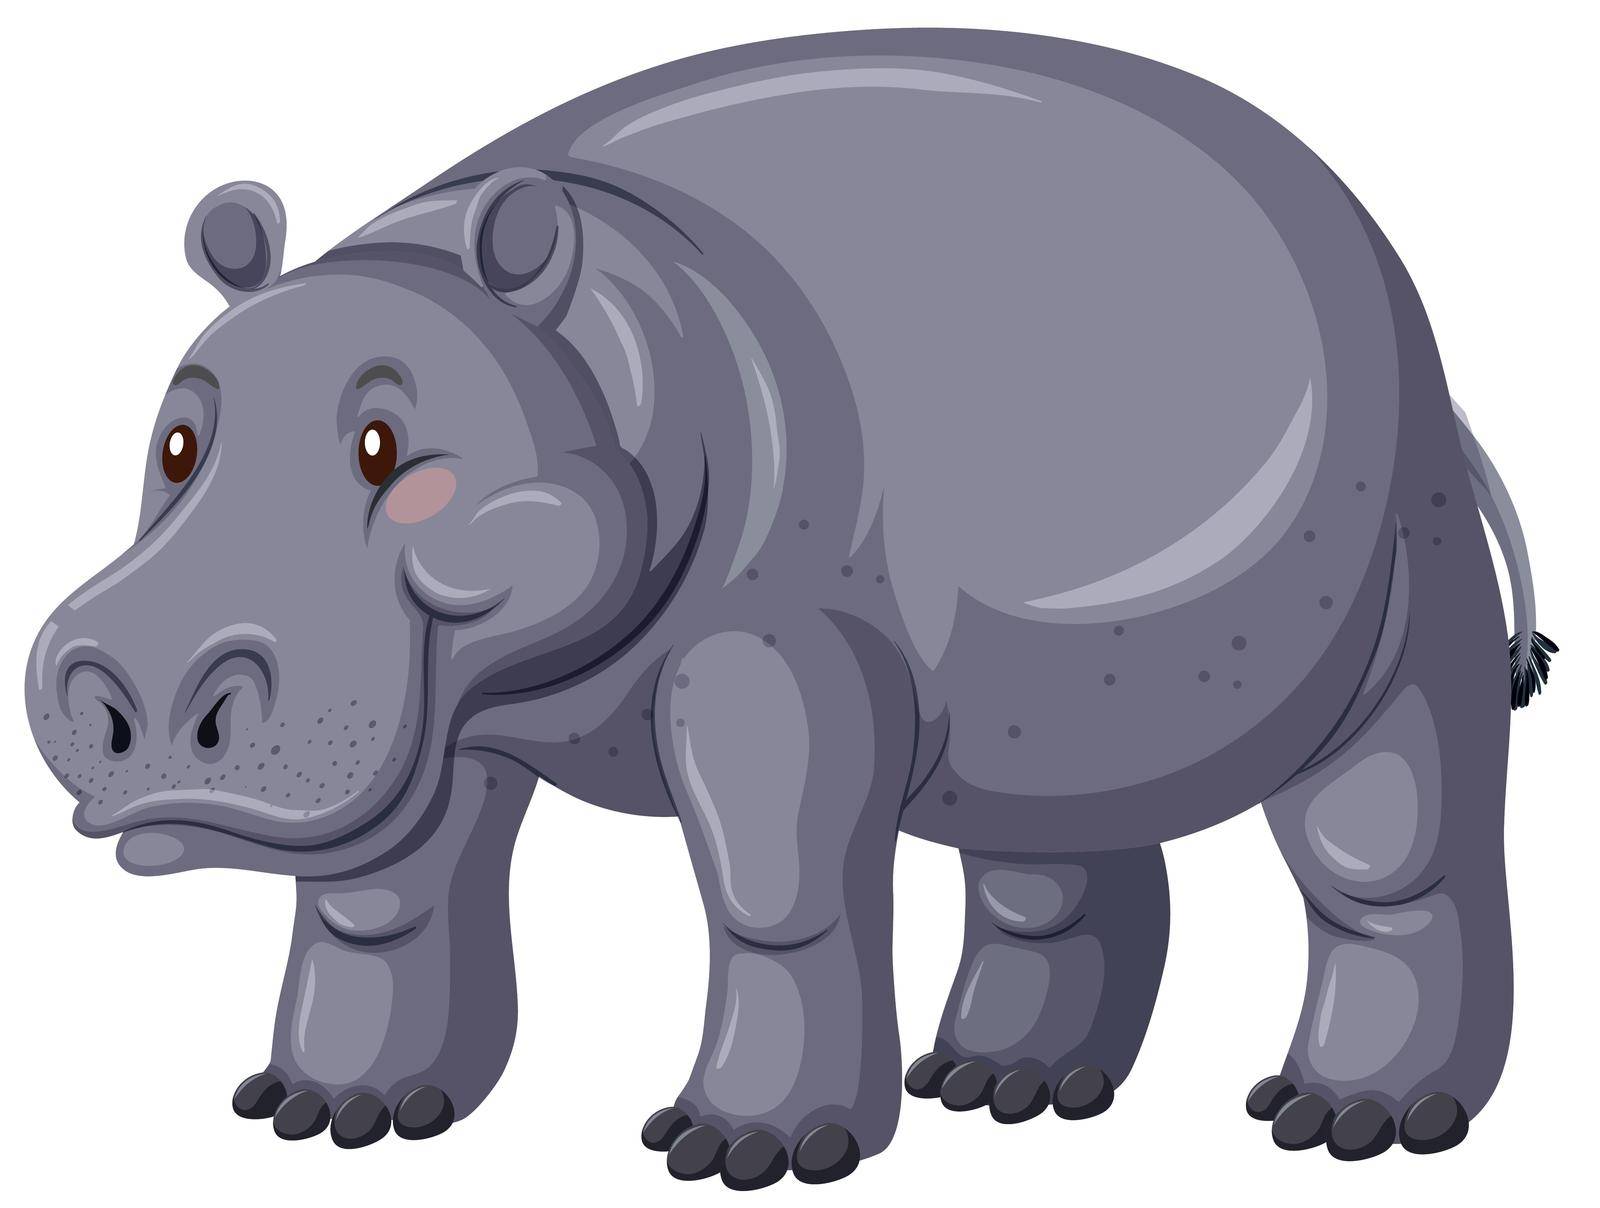 Hippo with gray skin illustration